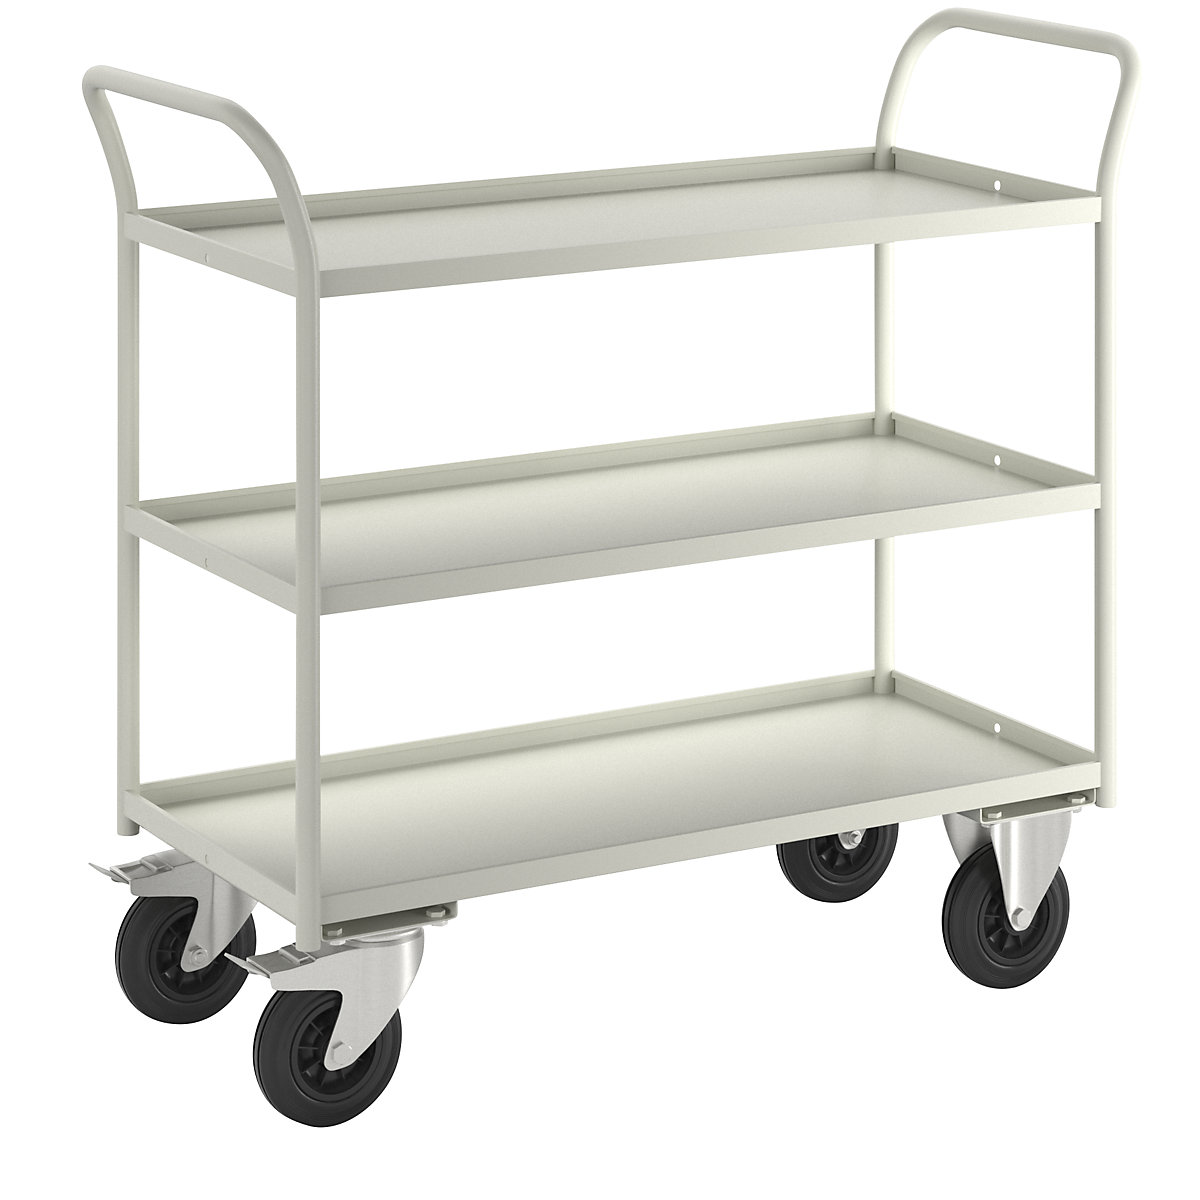 KM41 table trolley – Kongamek, 3 shelves with raised edges, LxWxH 1080 x 450 x 1000 mm, white, 2 swivel castors with stops, 2 fixed castors-3